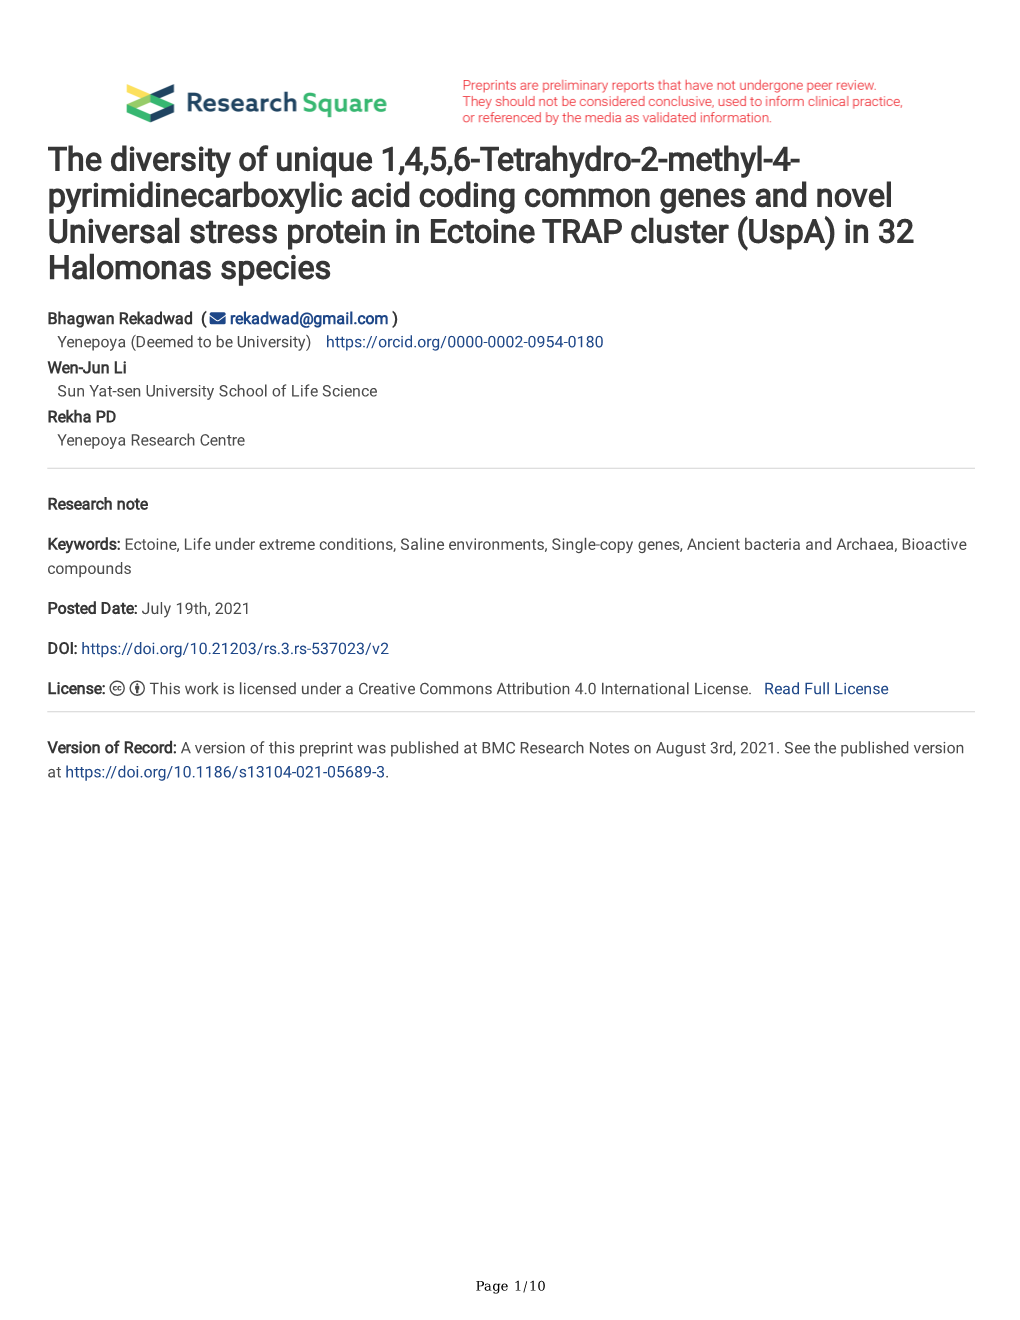 Pyrimidinecarboxylic Acid Coding Common Genes and Novel Universal Stress Protein in Ectoine TRAP Cluster (Uspa) in 32 Halomonas Species